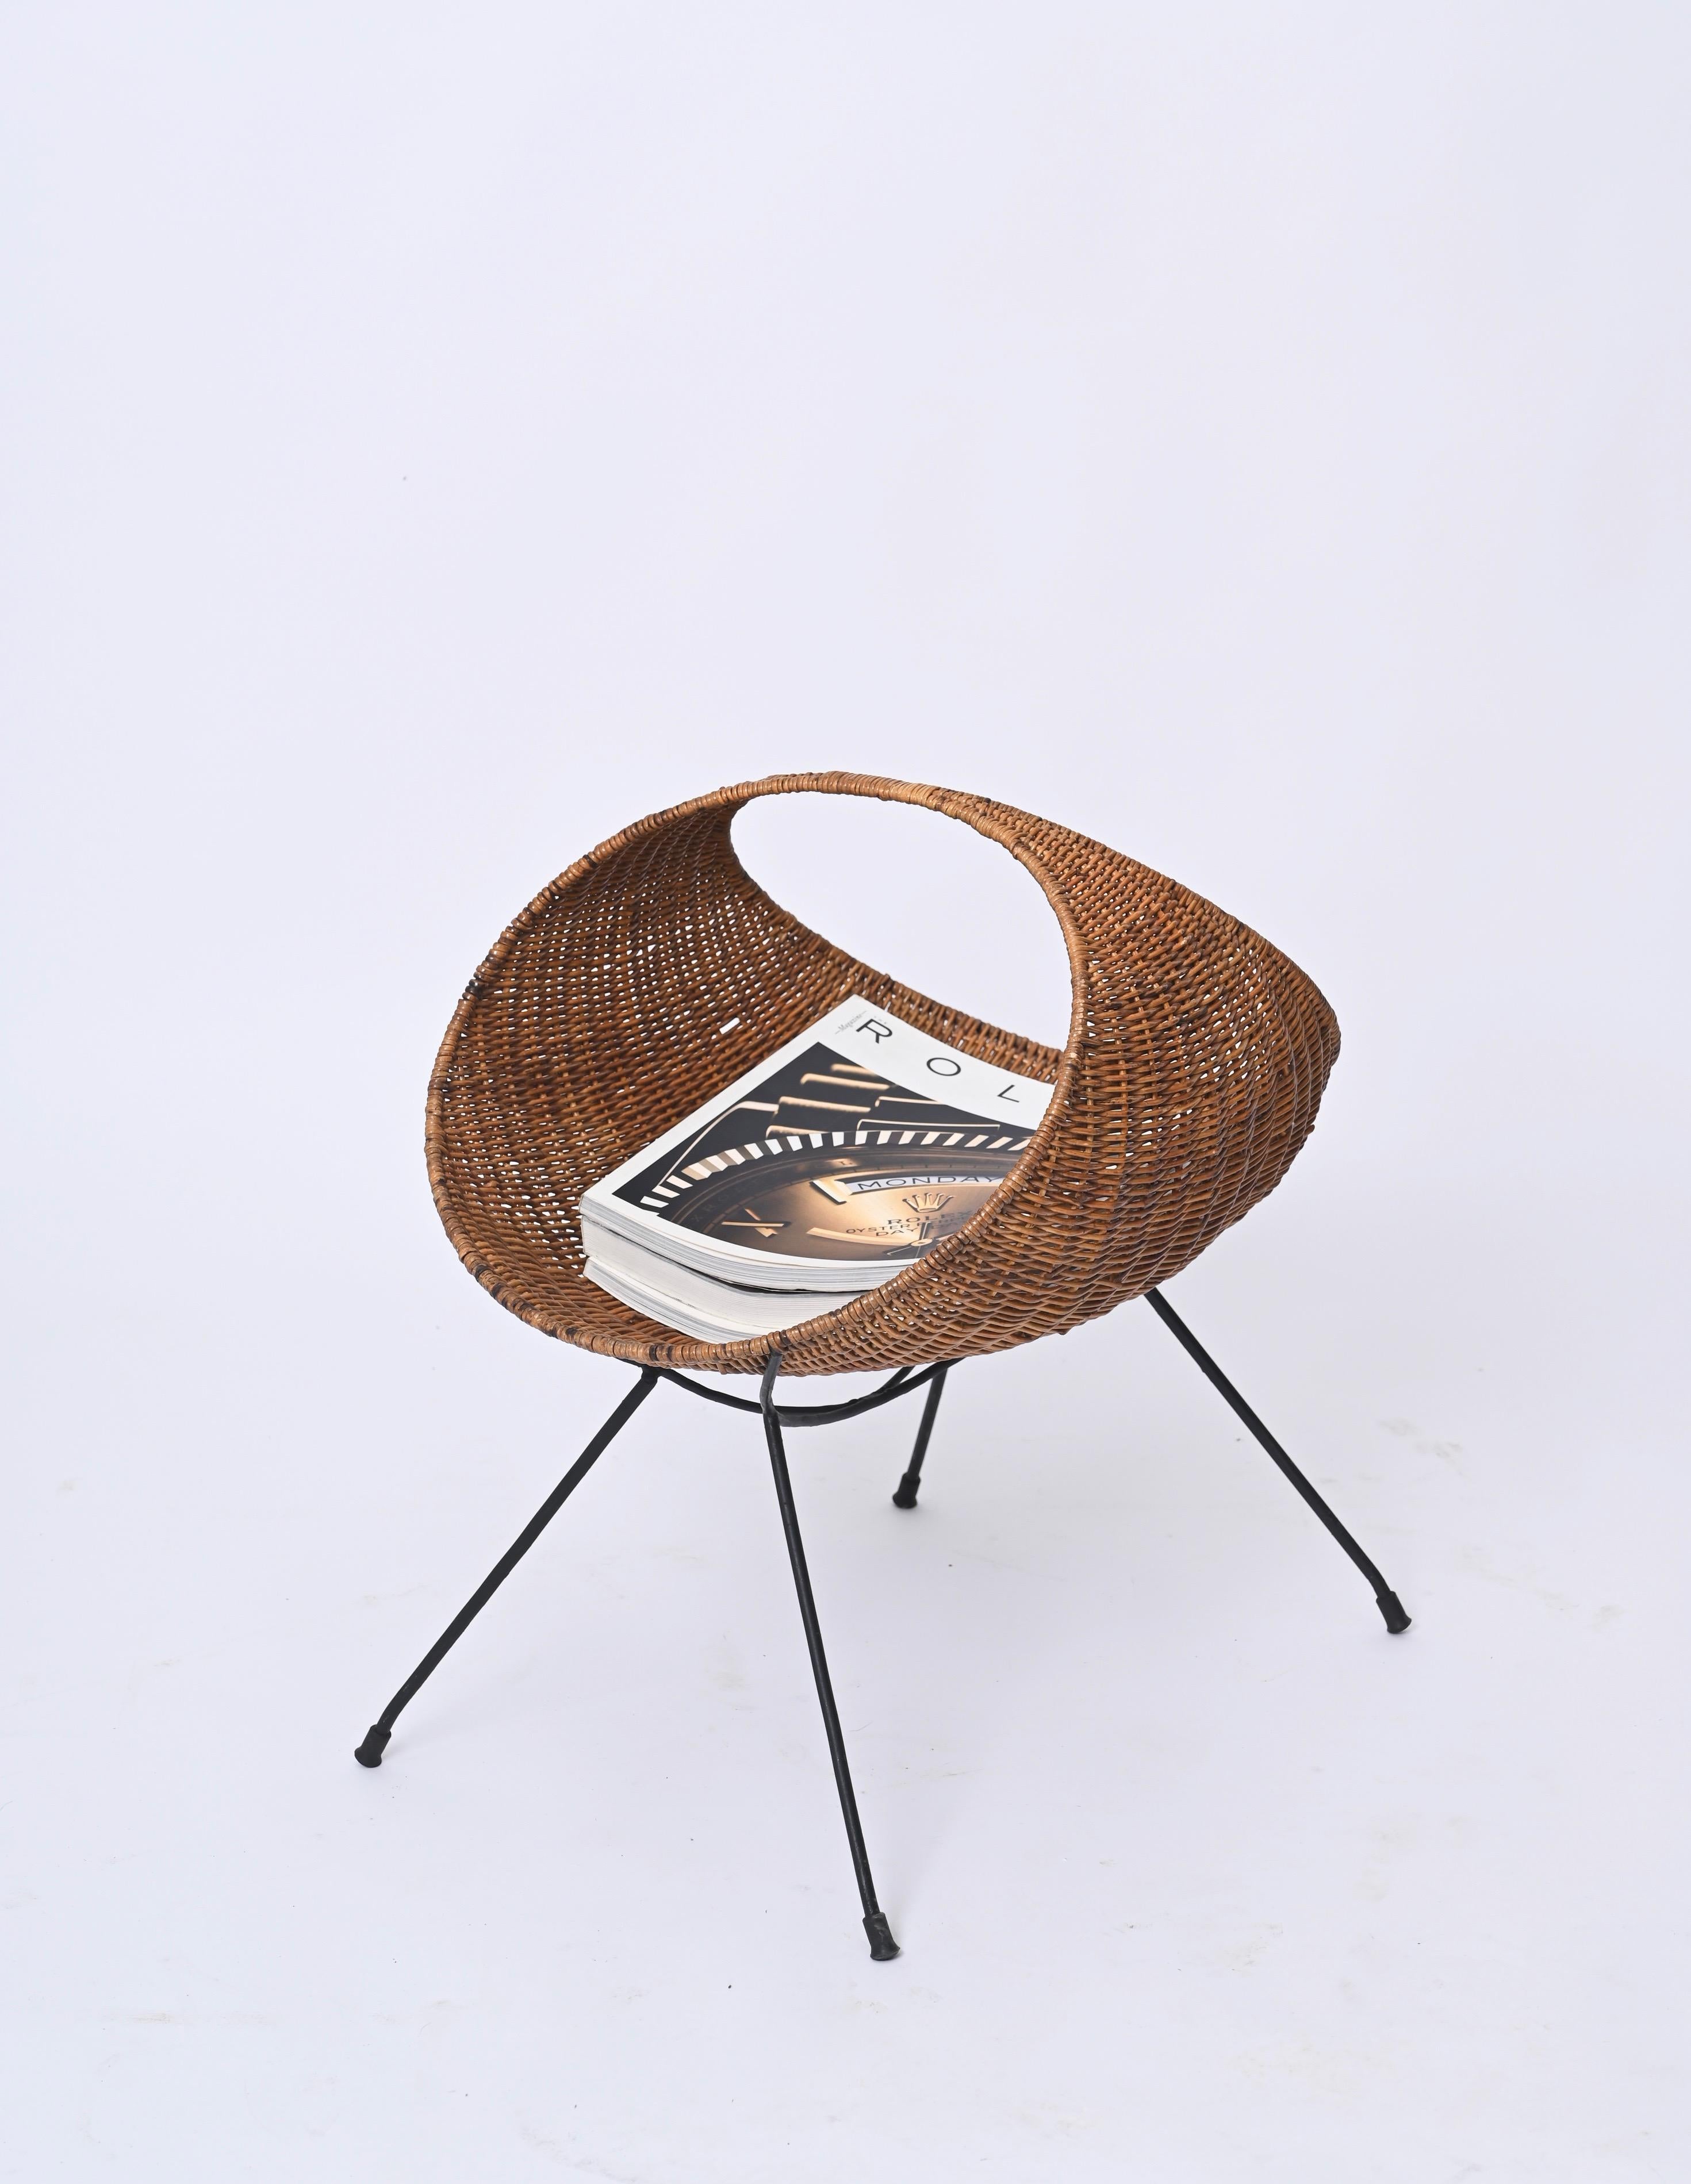 Campo & Graffi Magazine Rack in Wicker and Black Enameled Iron, Italy 1950s For Sale 7